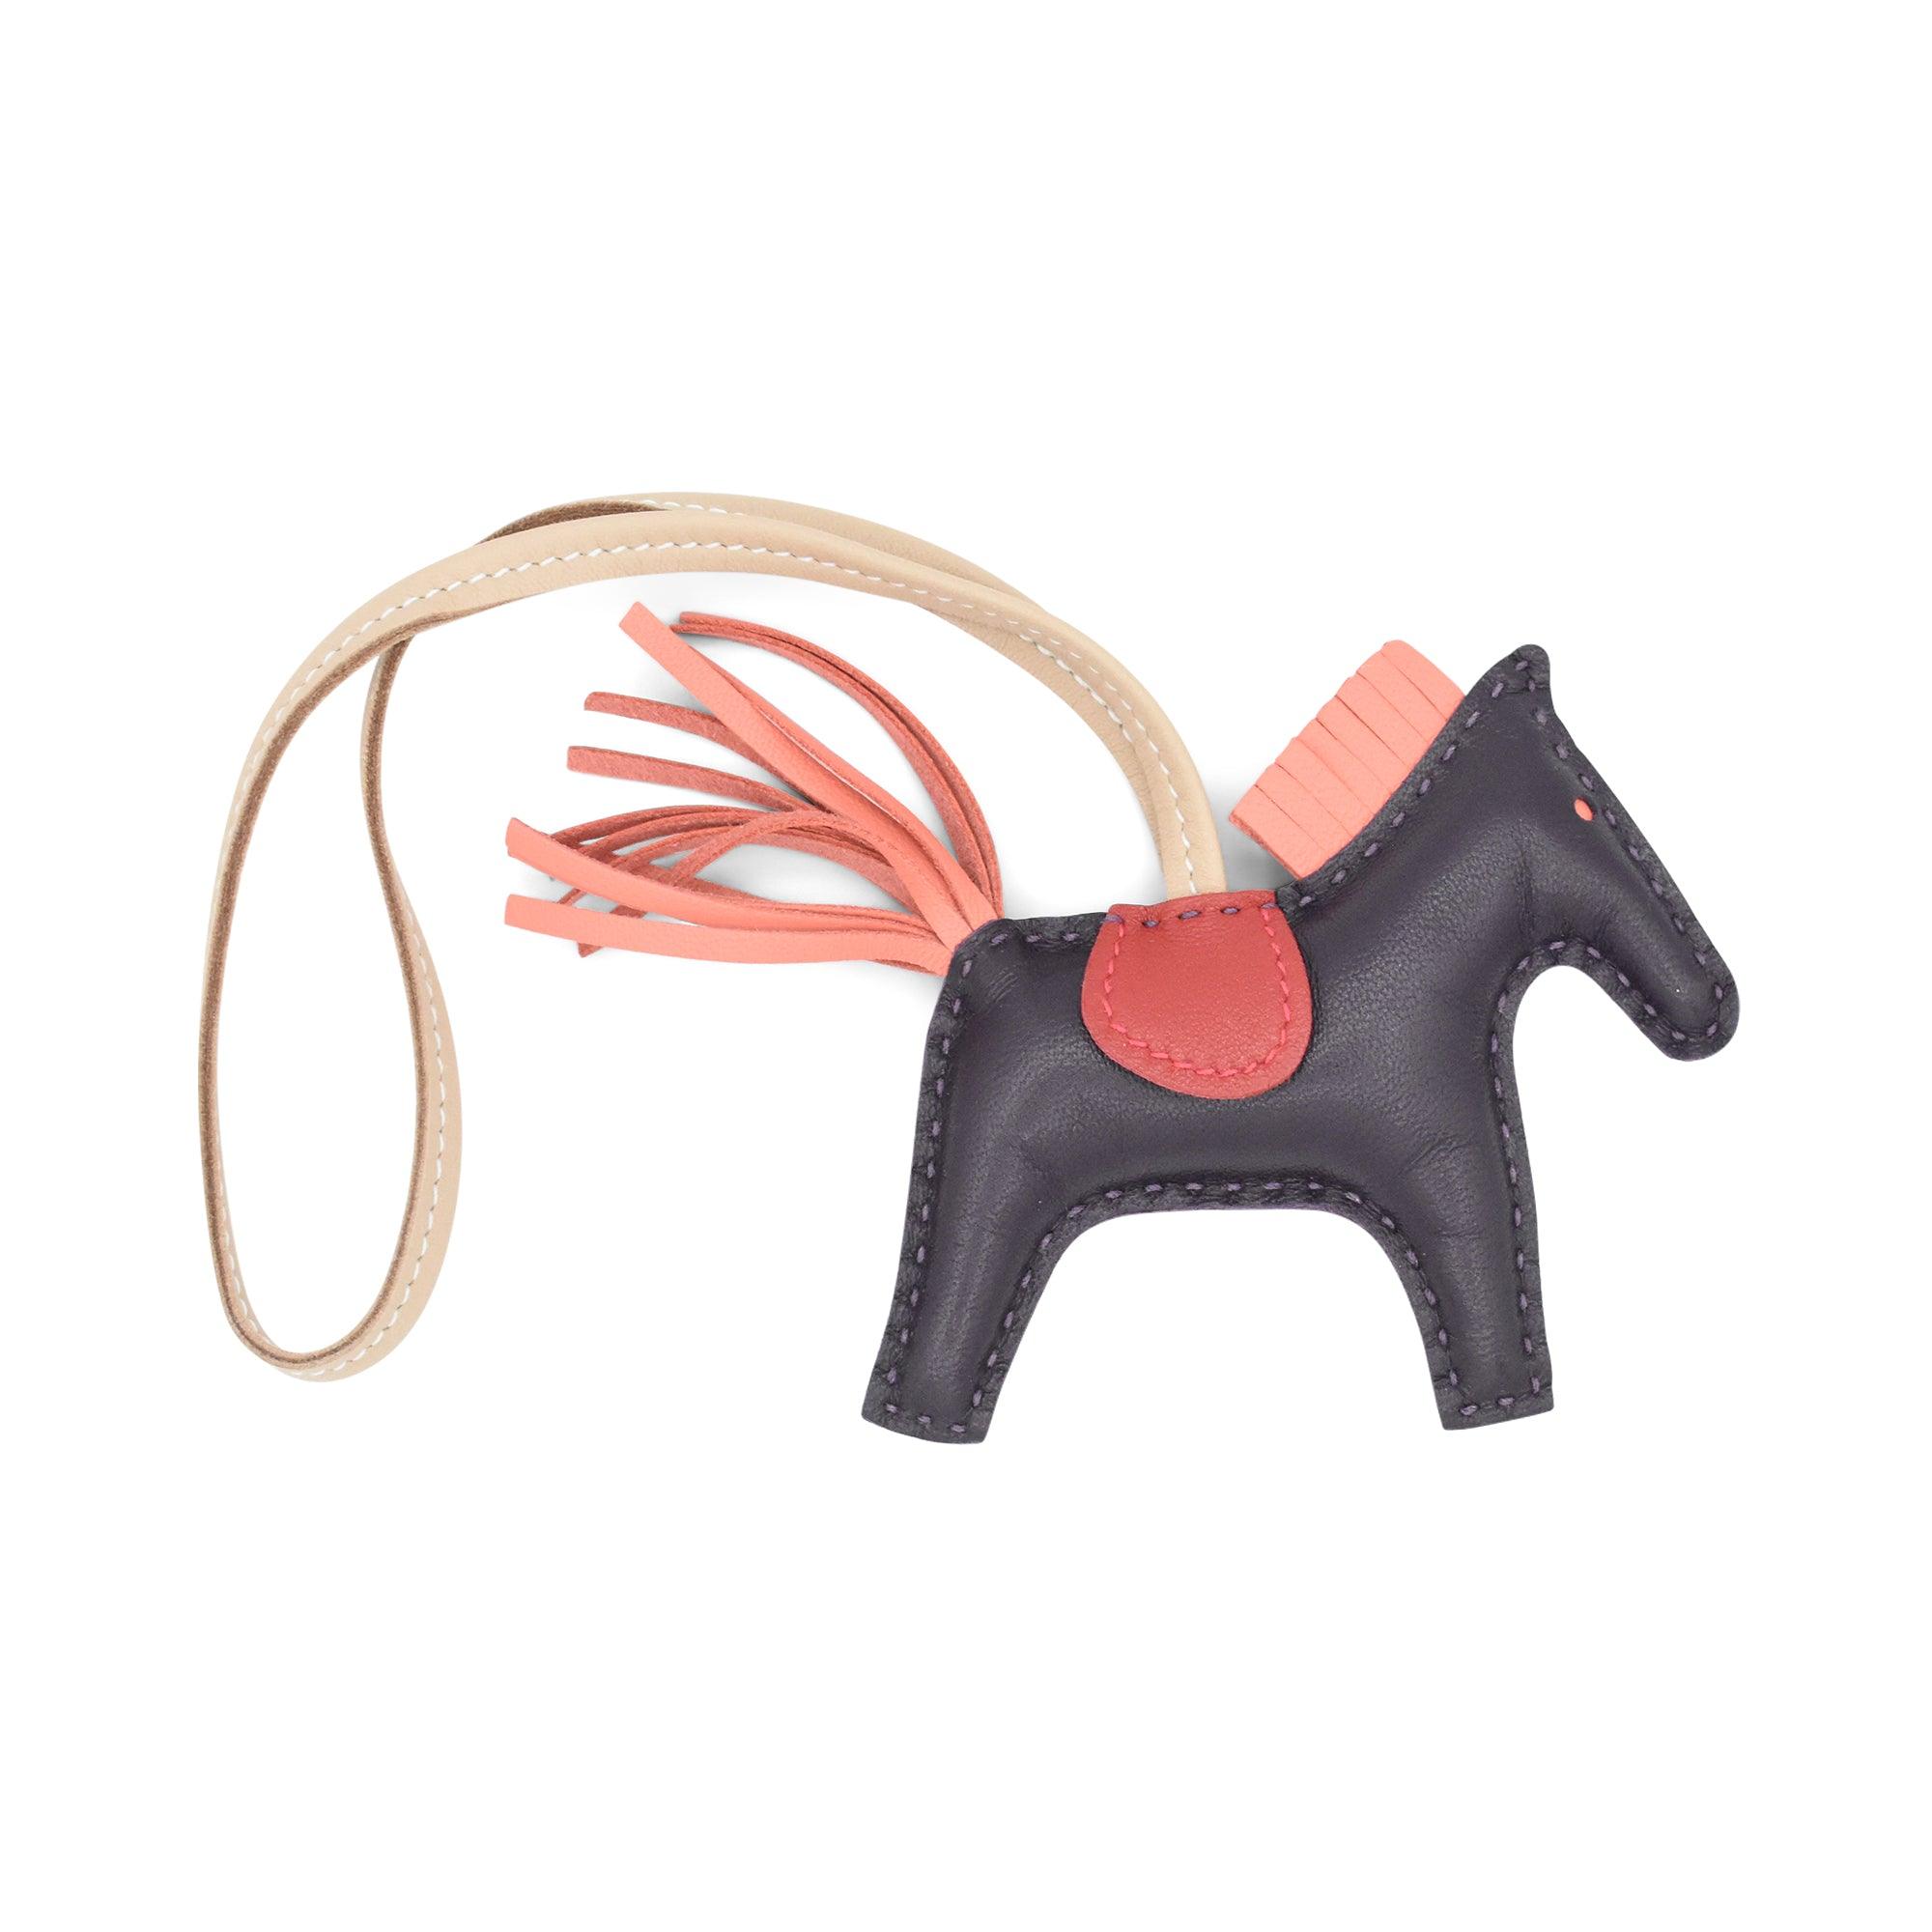 Hermes 'Rodeo' Bag Charm - Fashionably Yours